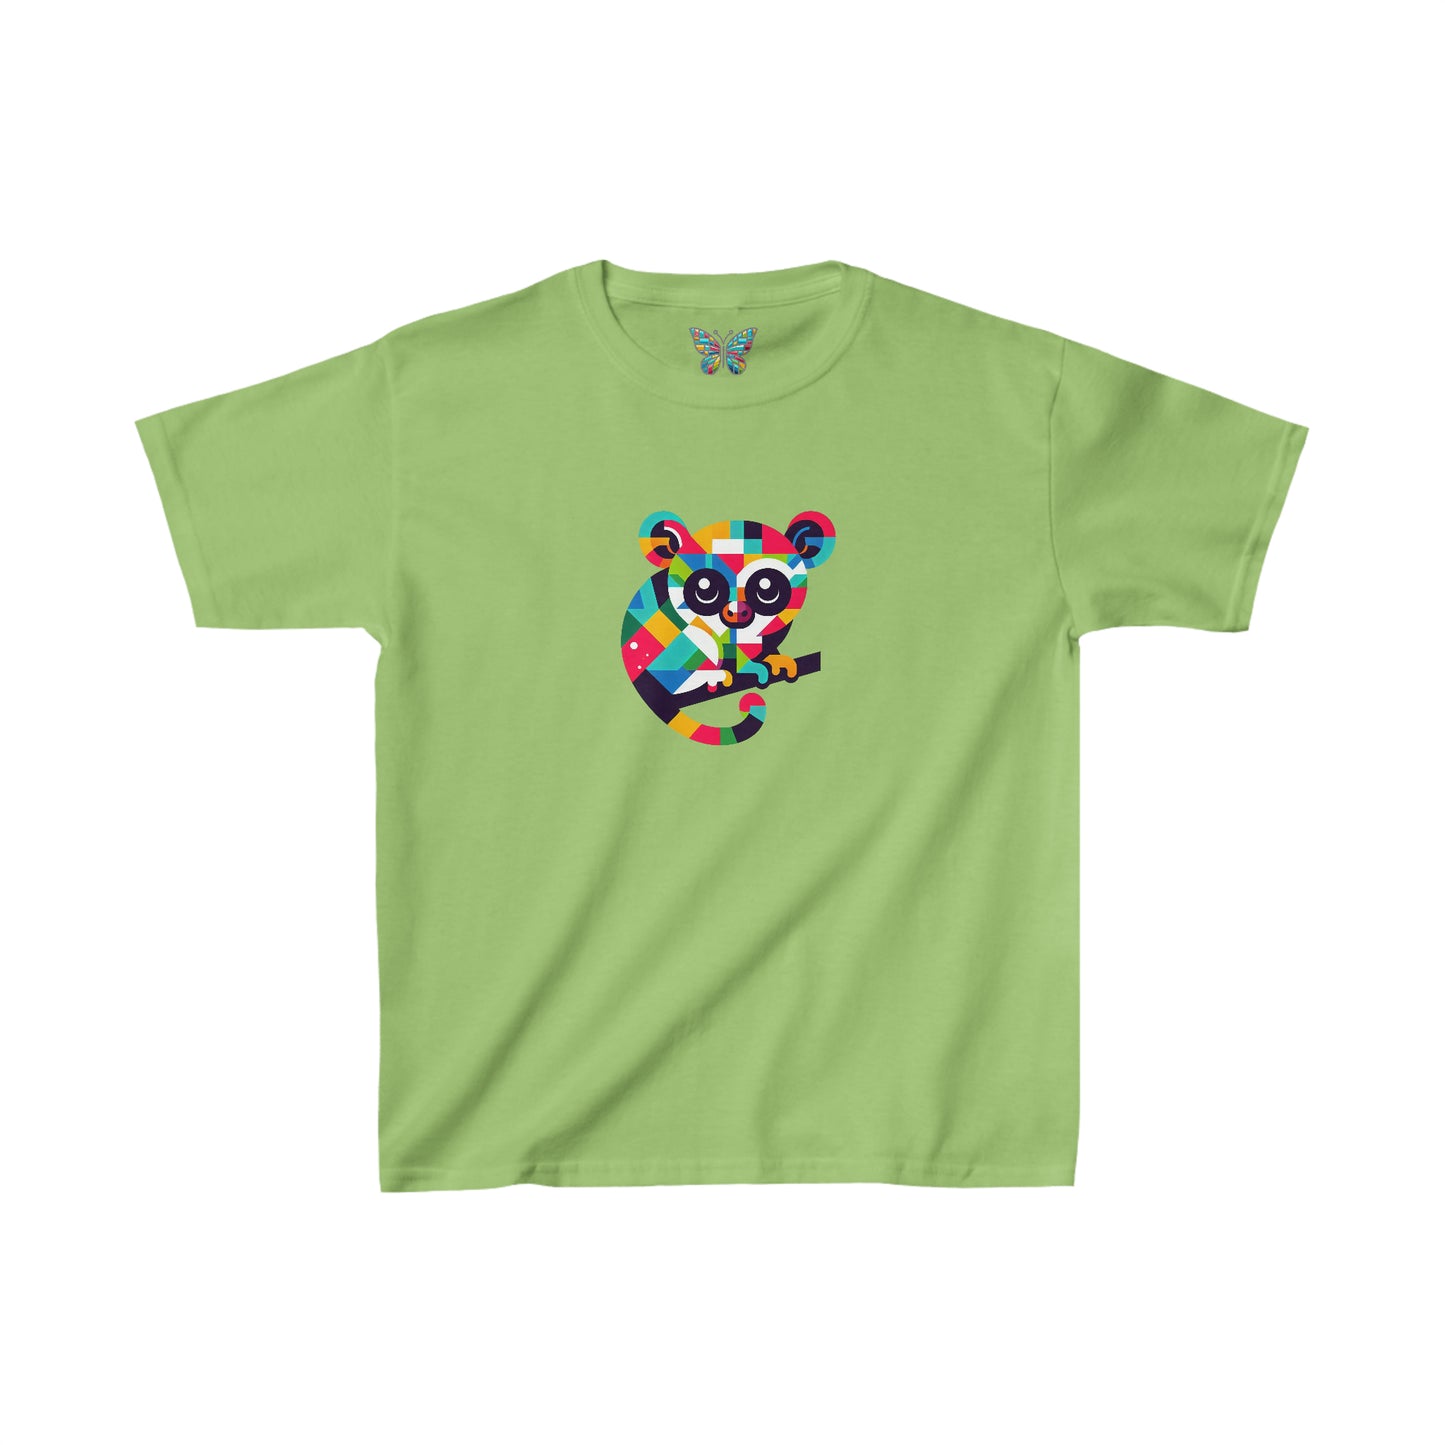 Tarsier Tranquilaze - Youth - Snazzle Tee